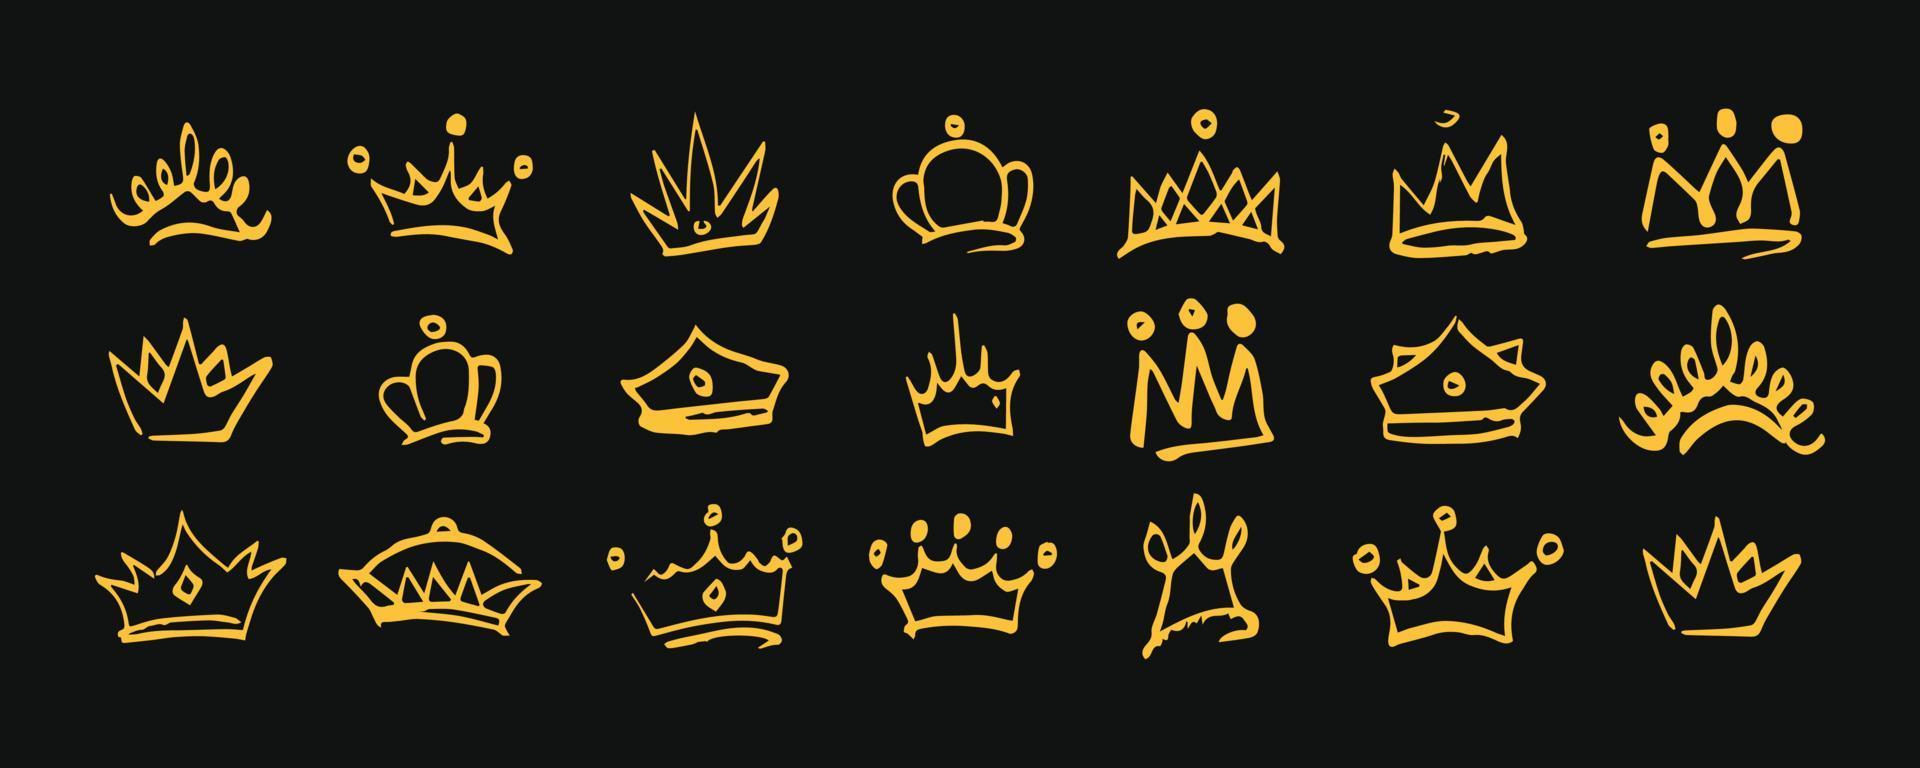 golden crown icon drawn in a minimalist marker style vector